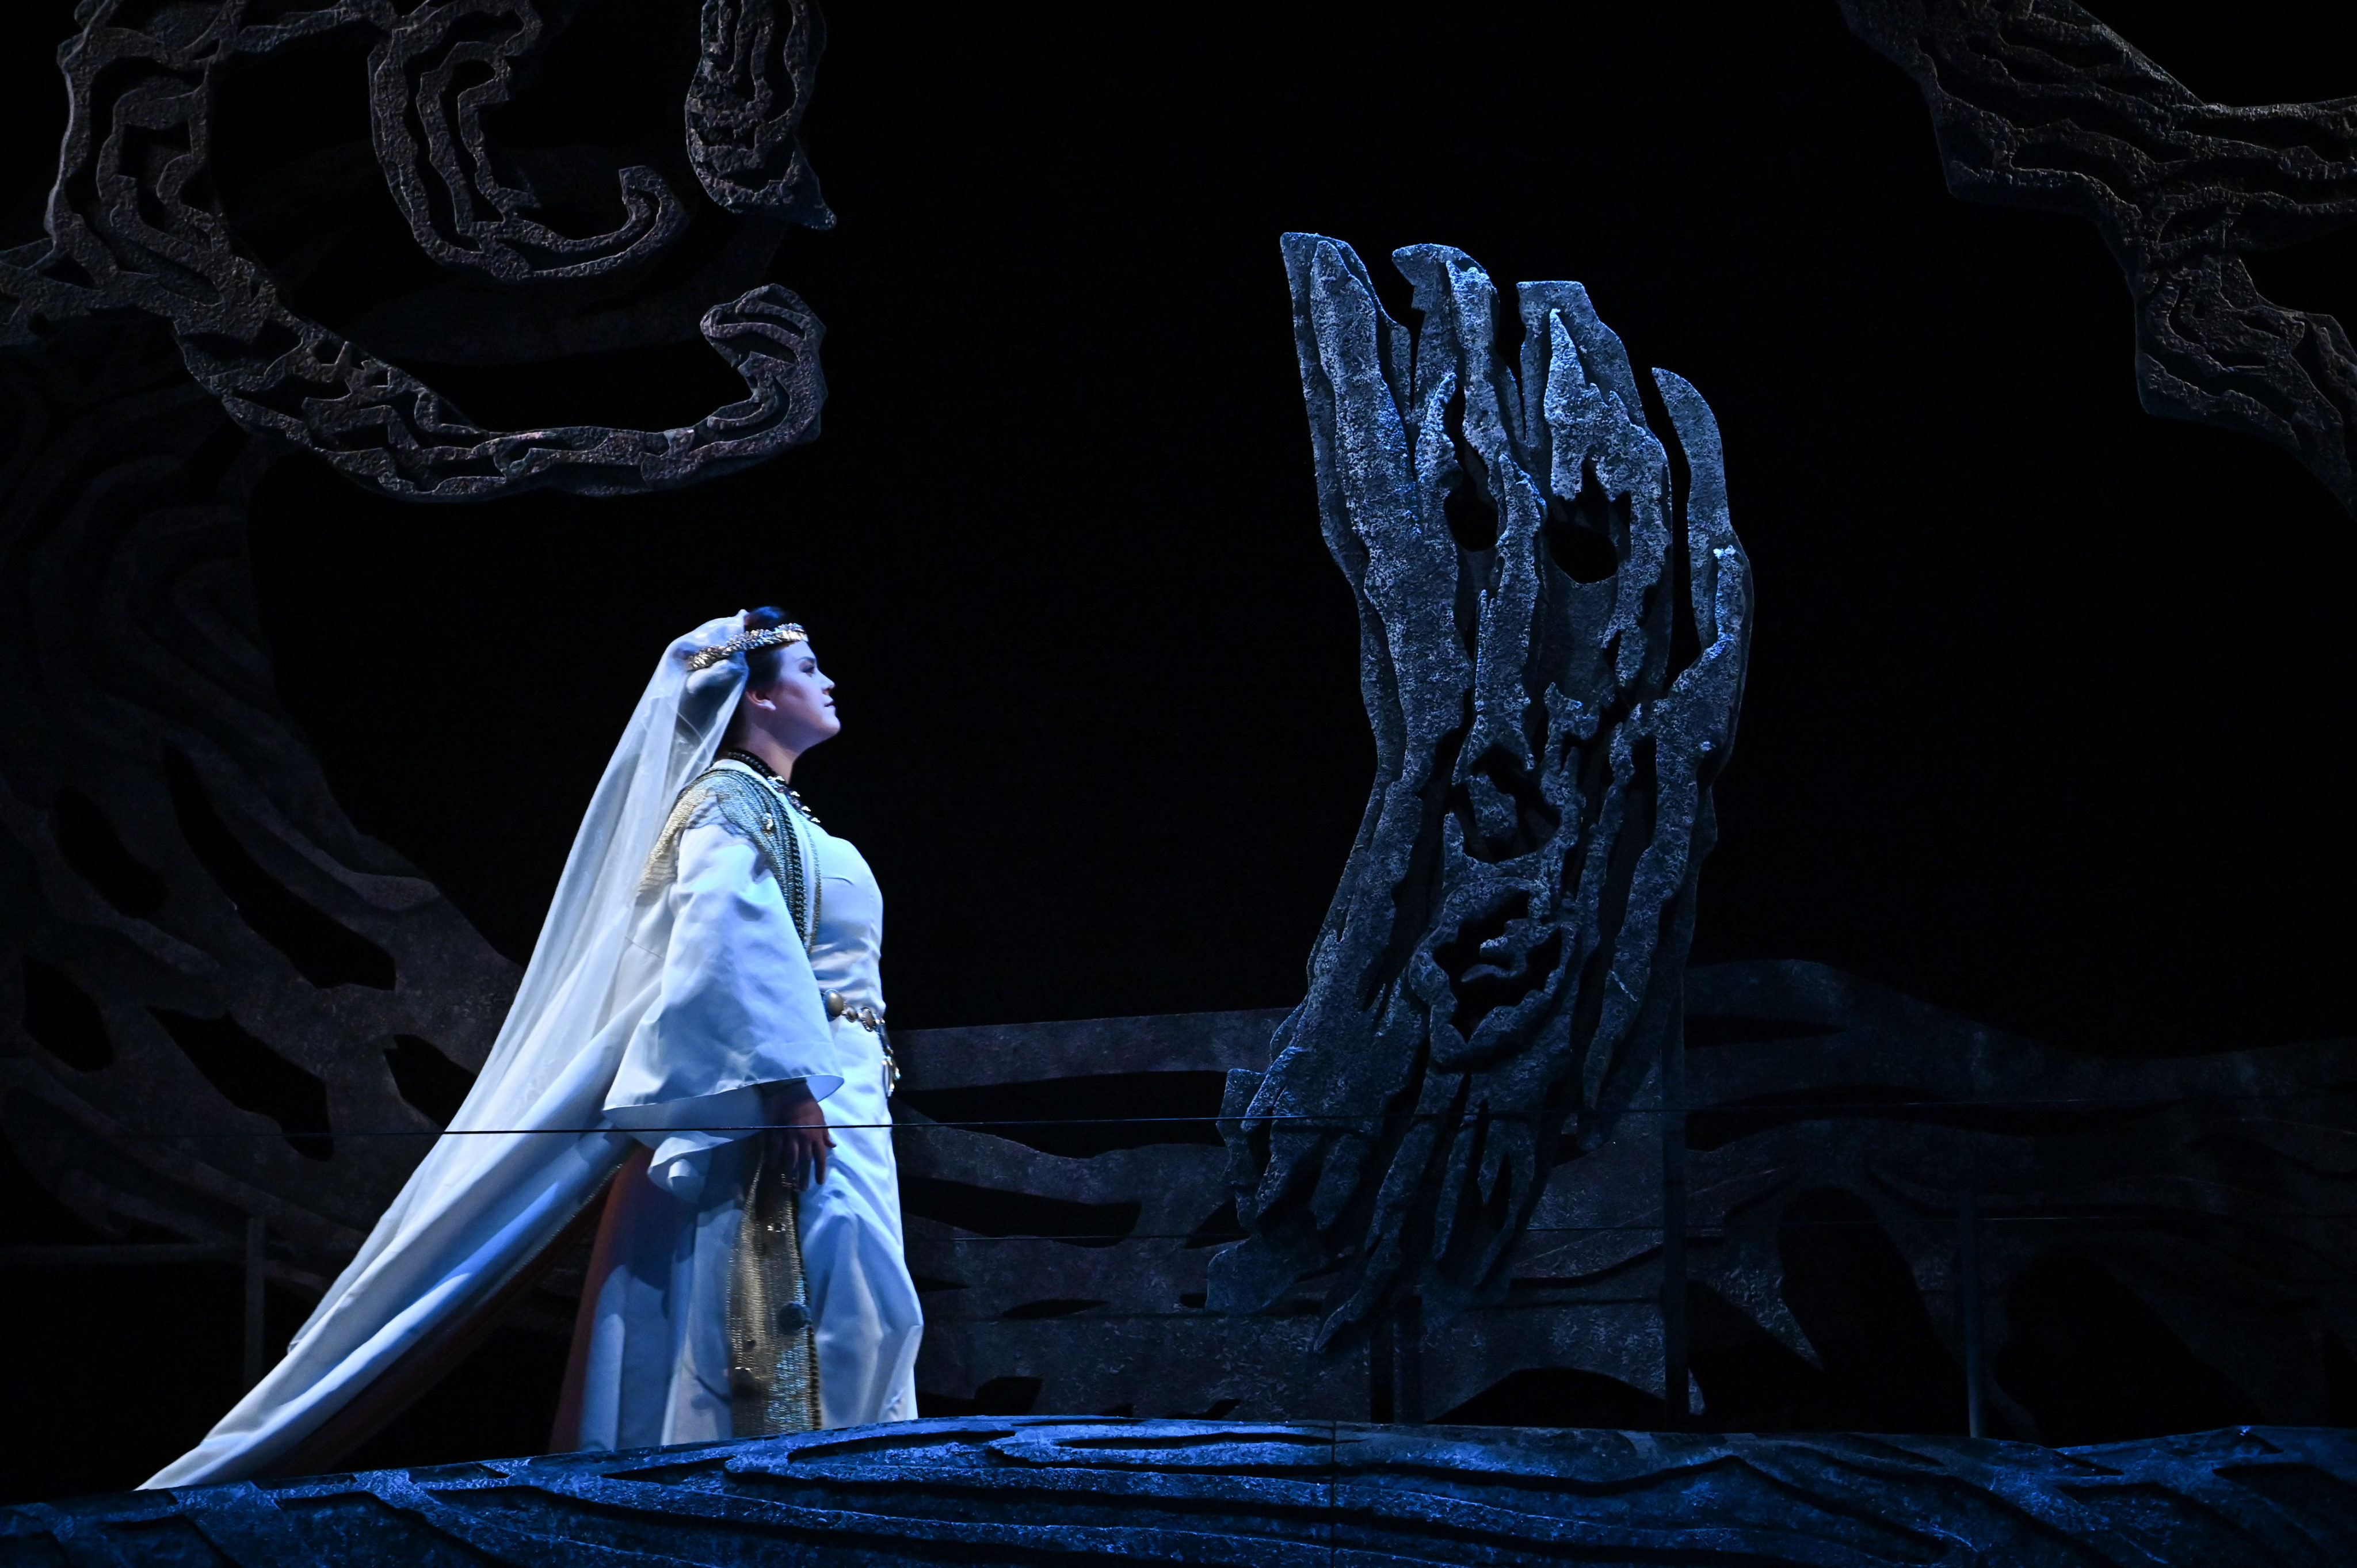 Meryl Dominguez as Norma performing Casta Diva in Musica Viva’s Norma on the opera’s opening night in Hong Kong. Photo: Musica Viva